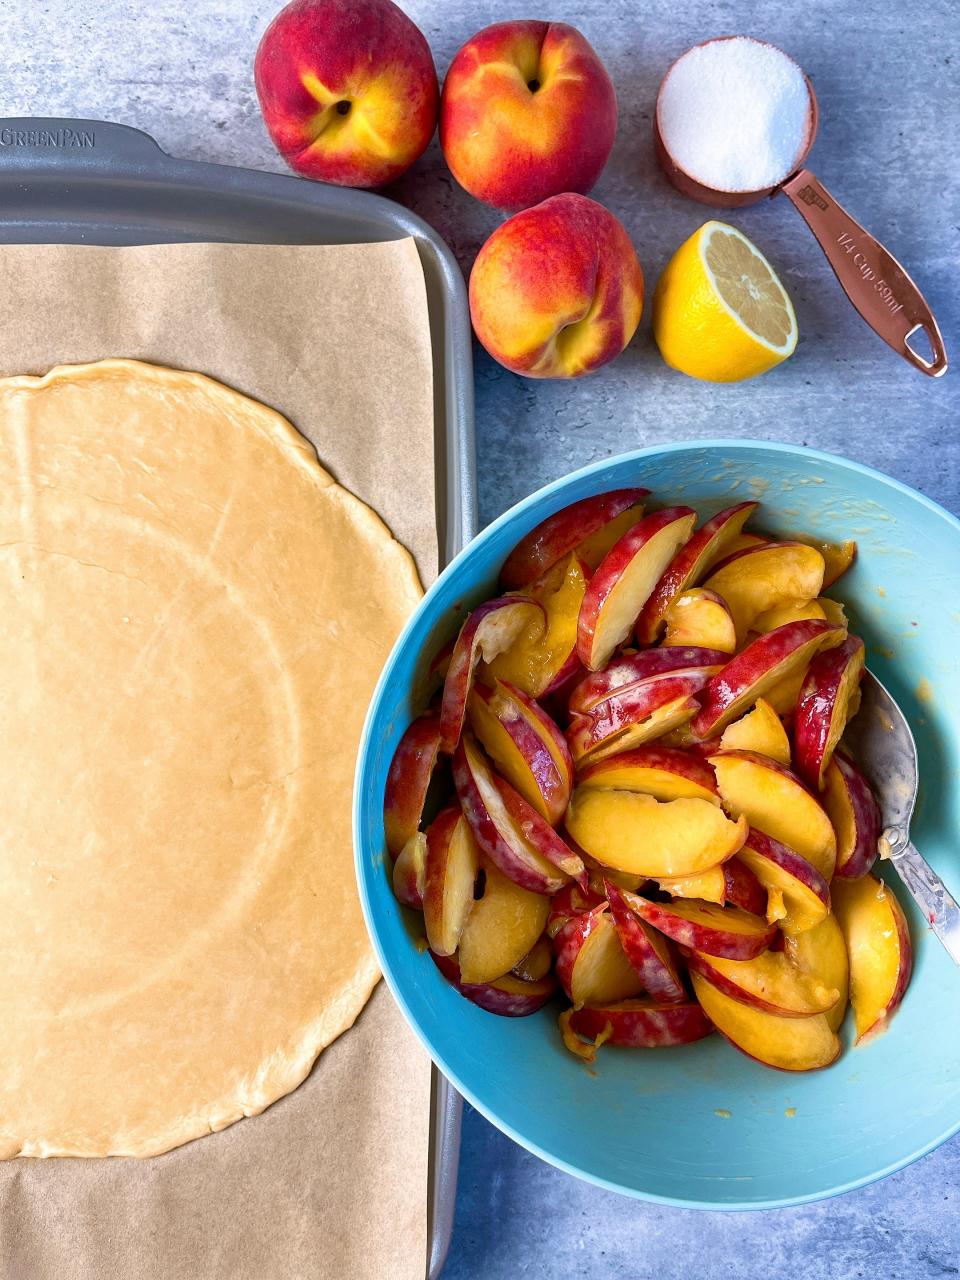 Arrange the peaches in the center of the dough (using the indentation as a guide) and work your way in, slightly overlapping the slices as you go.